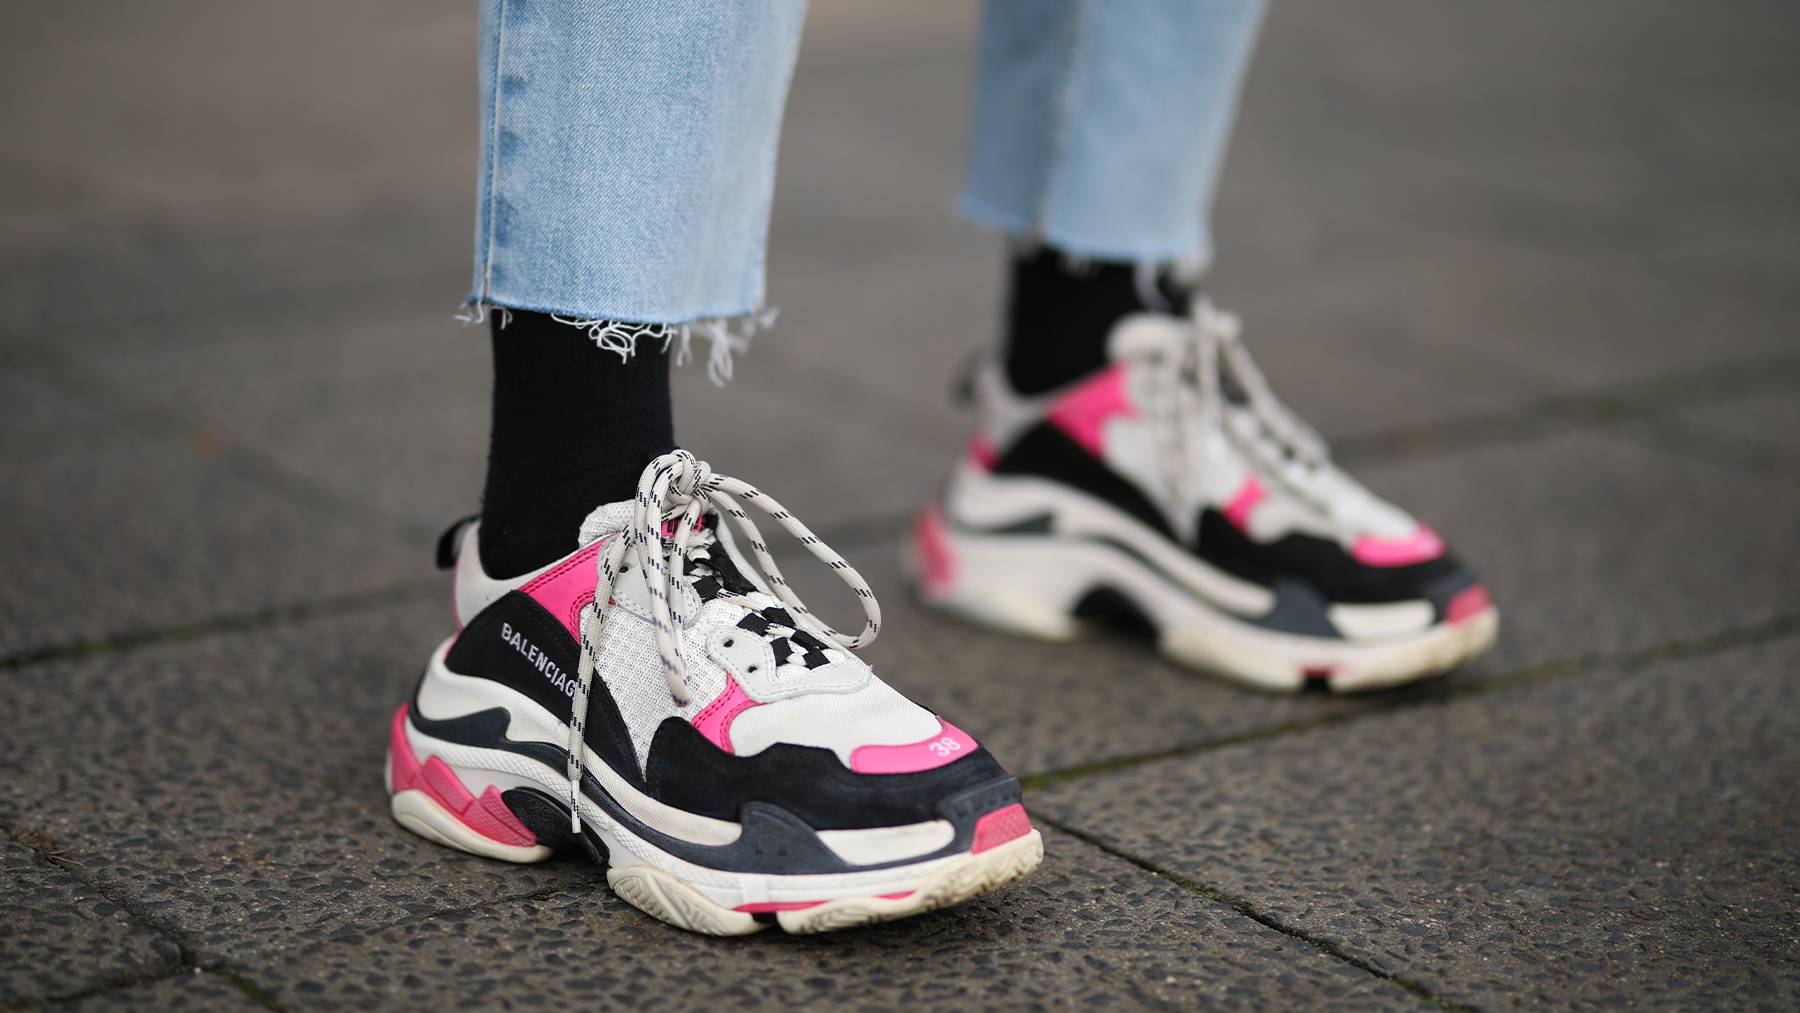 A close up view of white, black and pink Balenciaga chunky trainers worn with blue jeans.